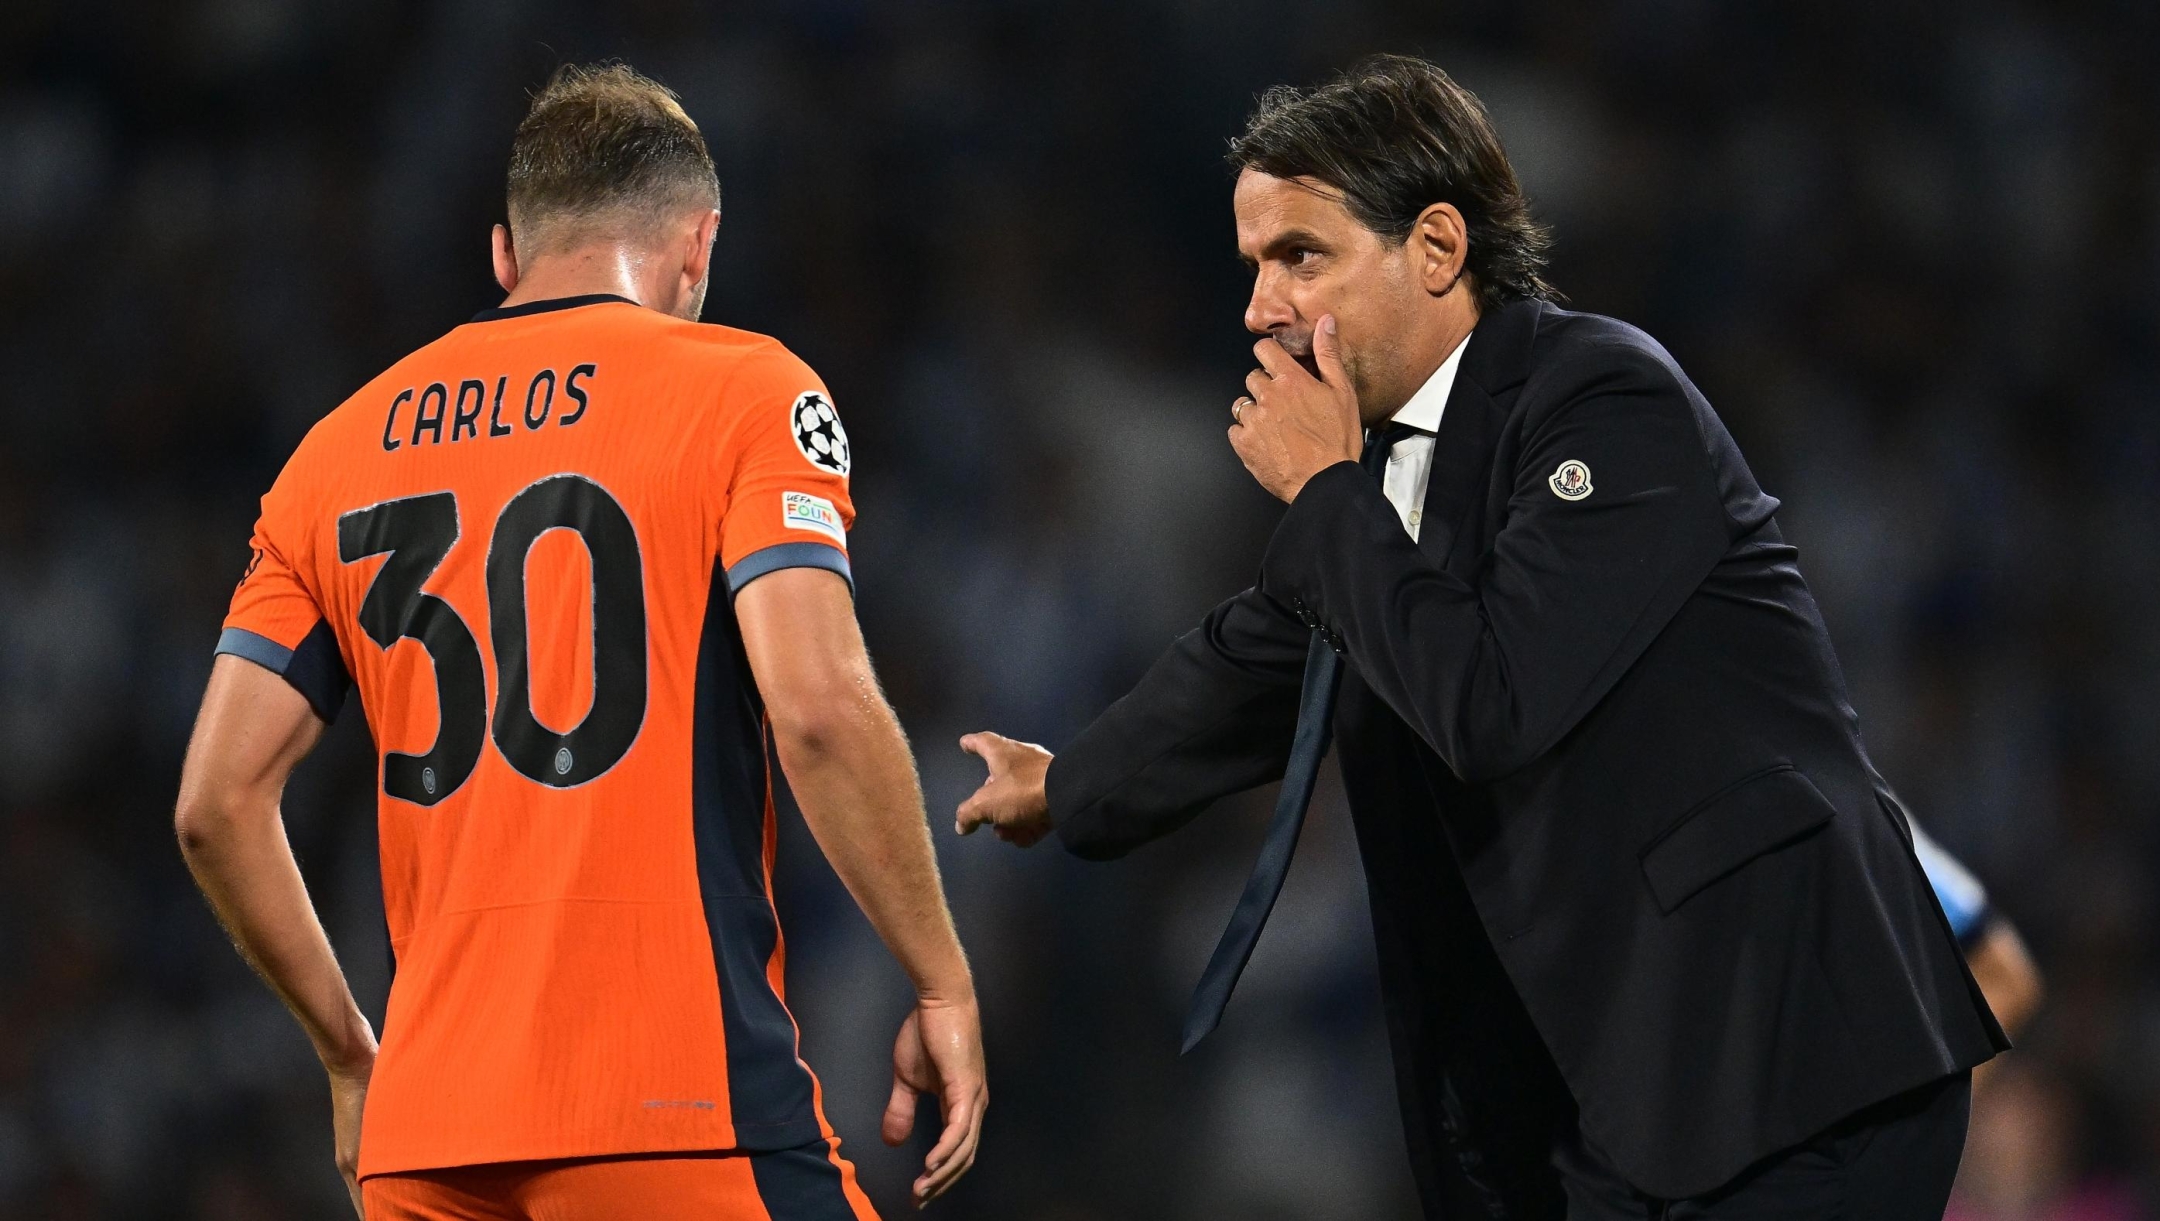 SAN SEBASTIAN, SPAIN - SEPTEMBER 20:  Head coach of FC Internazionale Simone Inzaghi reacts with Carlos Augusto during the UEFA Champions League match between Real Sociedad and FC Internazionale  at Reale Arena on September 20, 2023 in San Sebastian, Spain. (Photo by Mattia Ozbot - Inter/Inter via Getty Images)